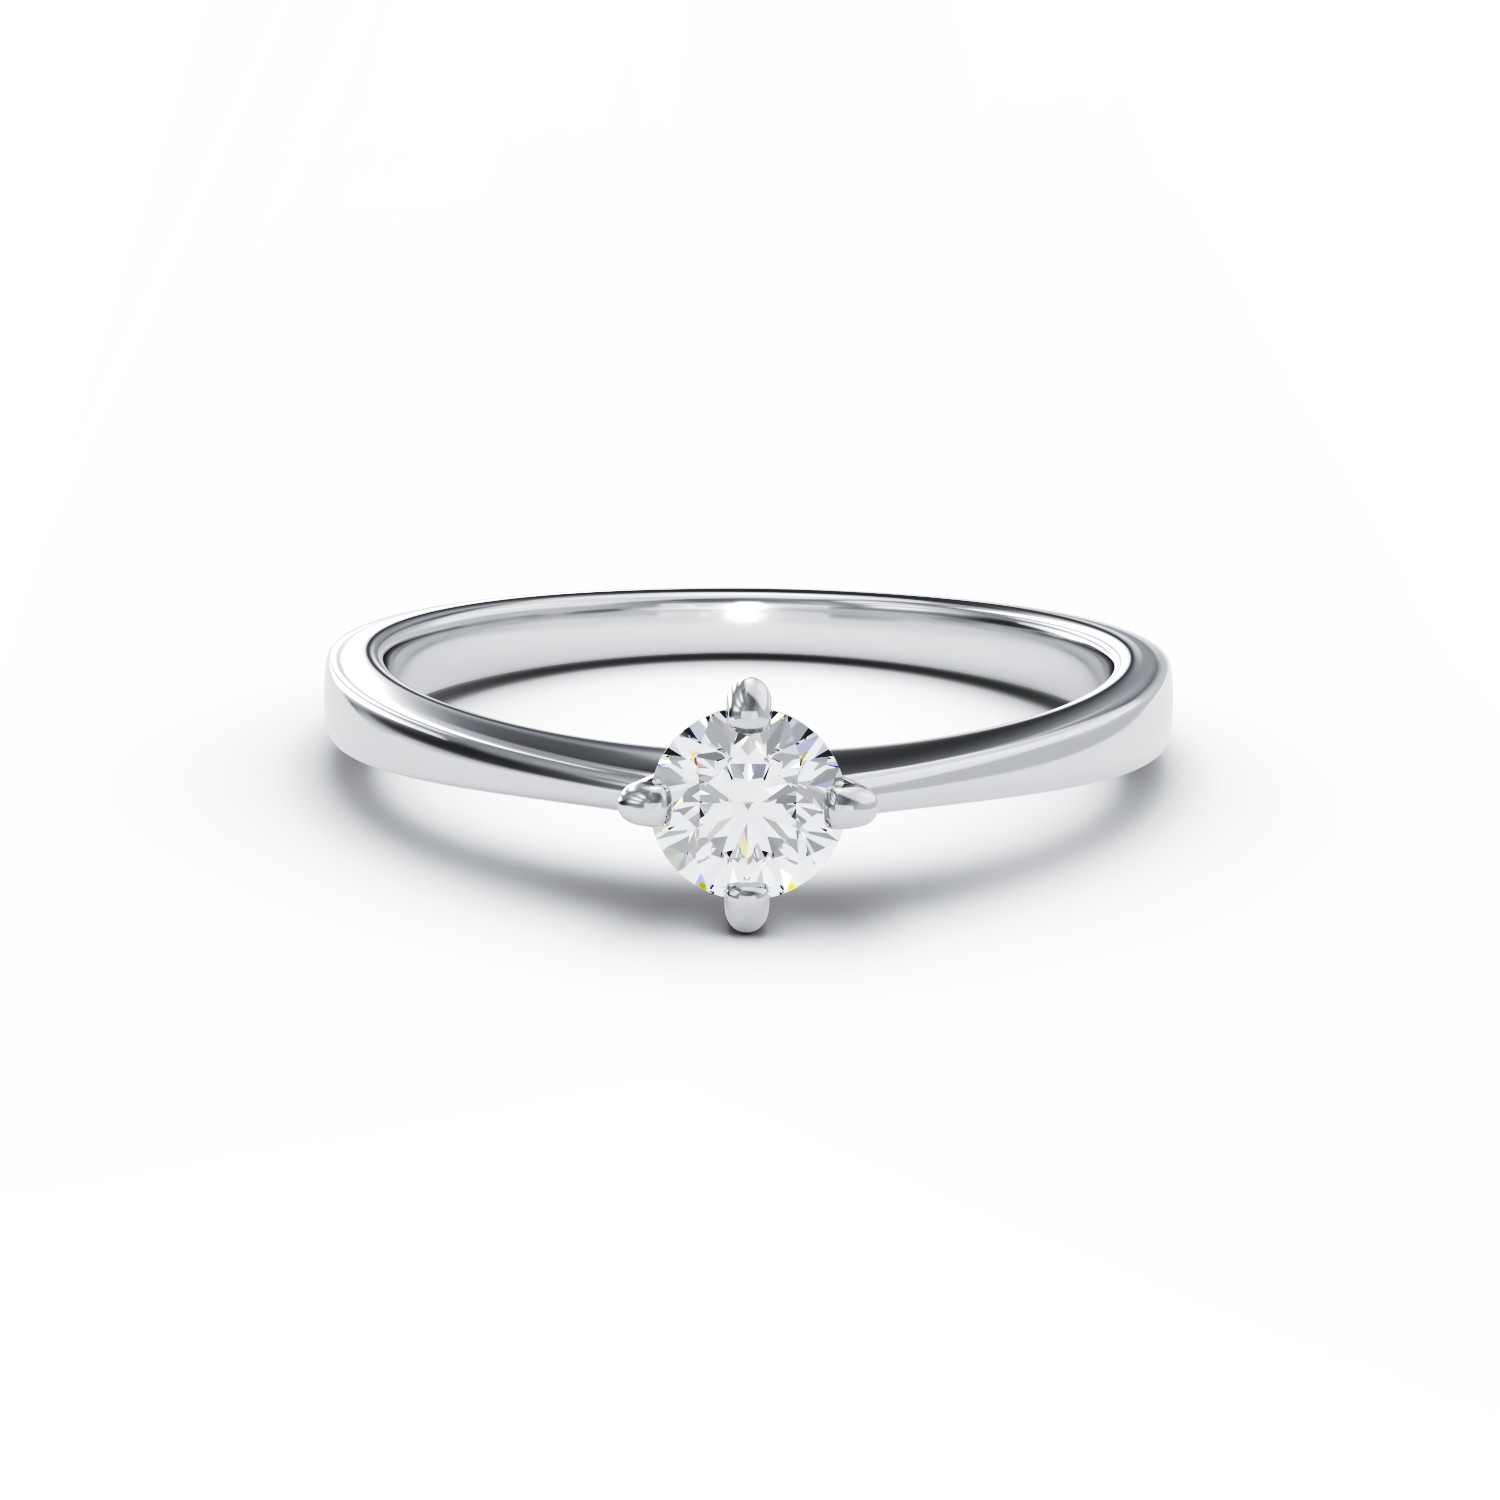 18K white gold engagement ring with 0.31ct diamond